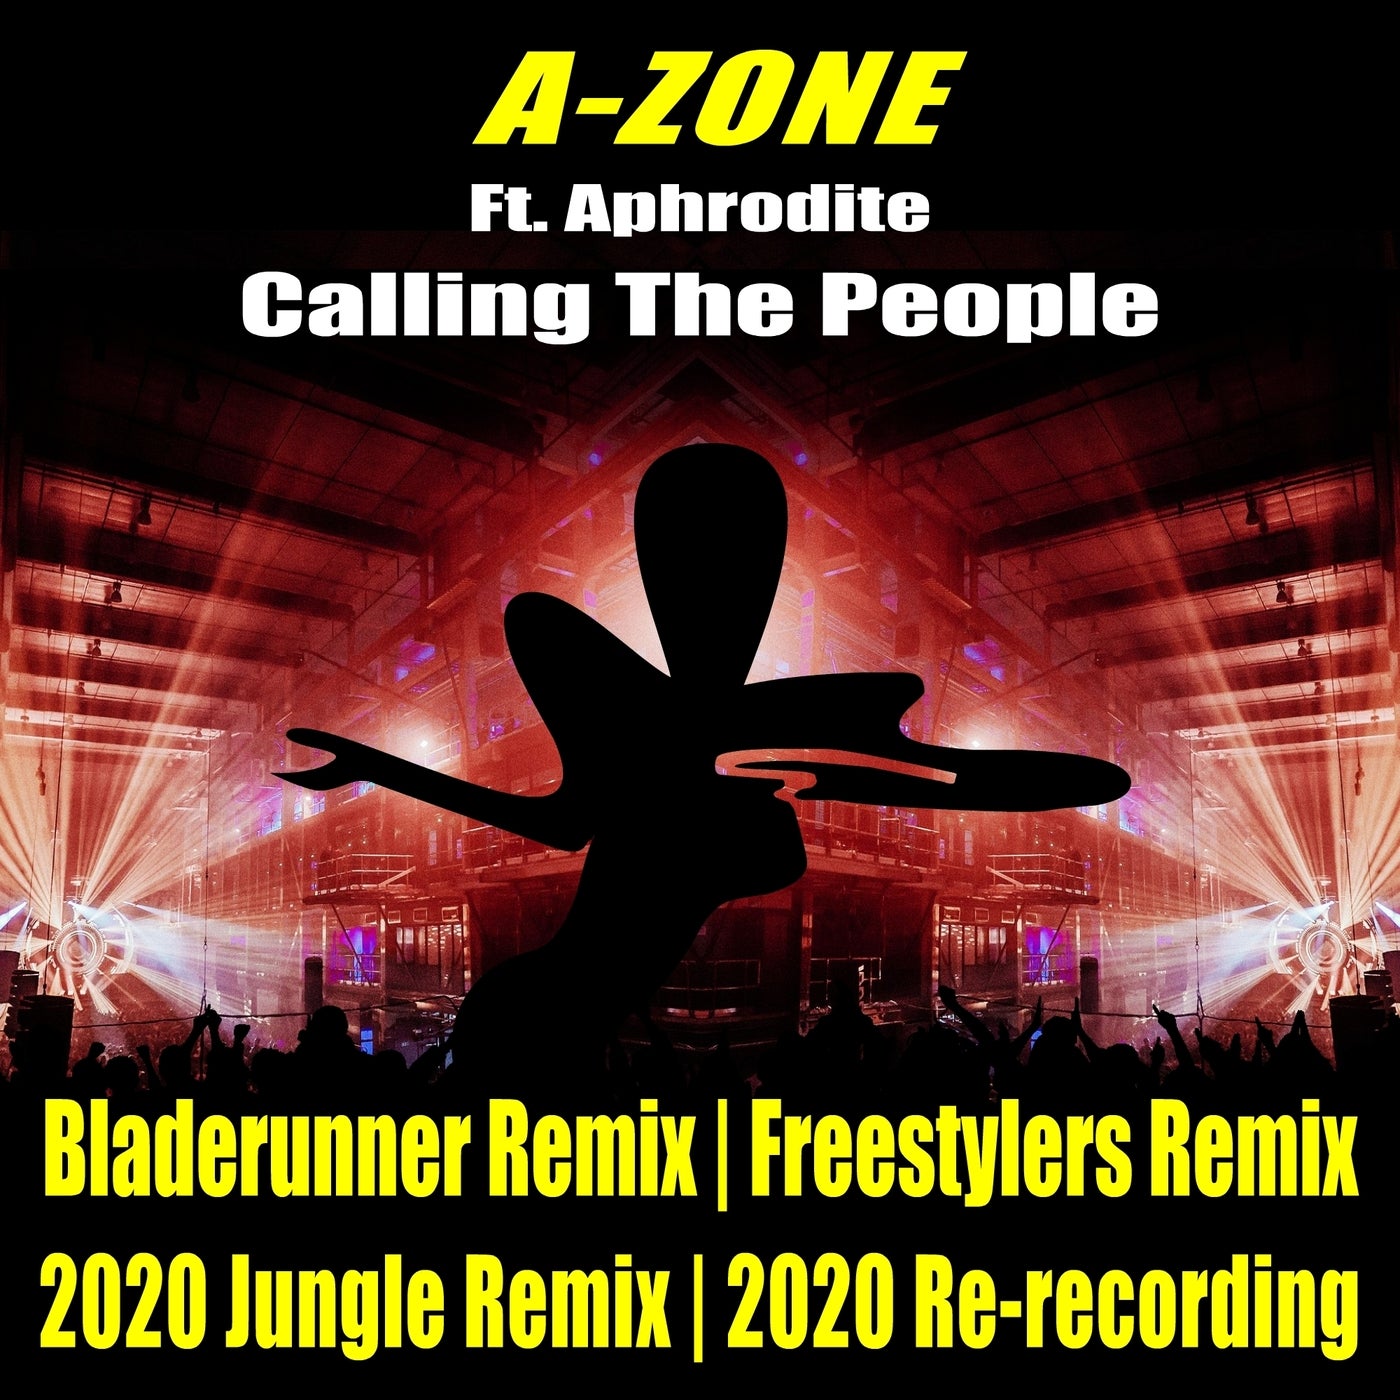 Calling The People Original and Remixes